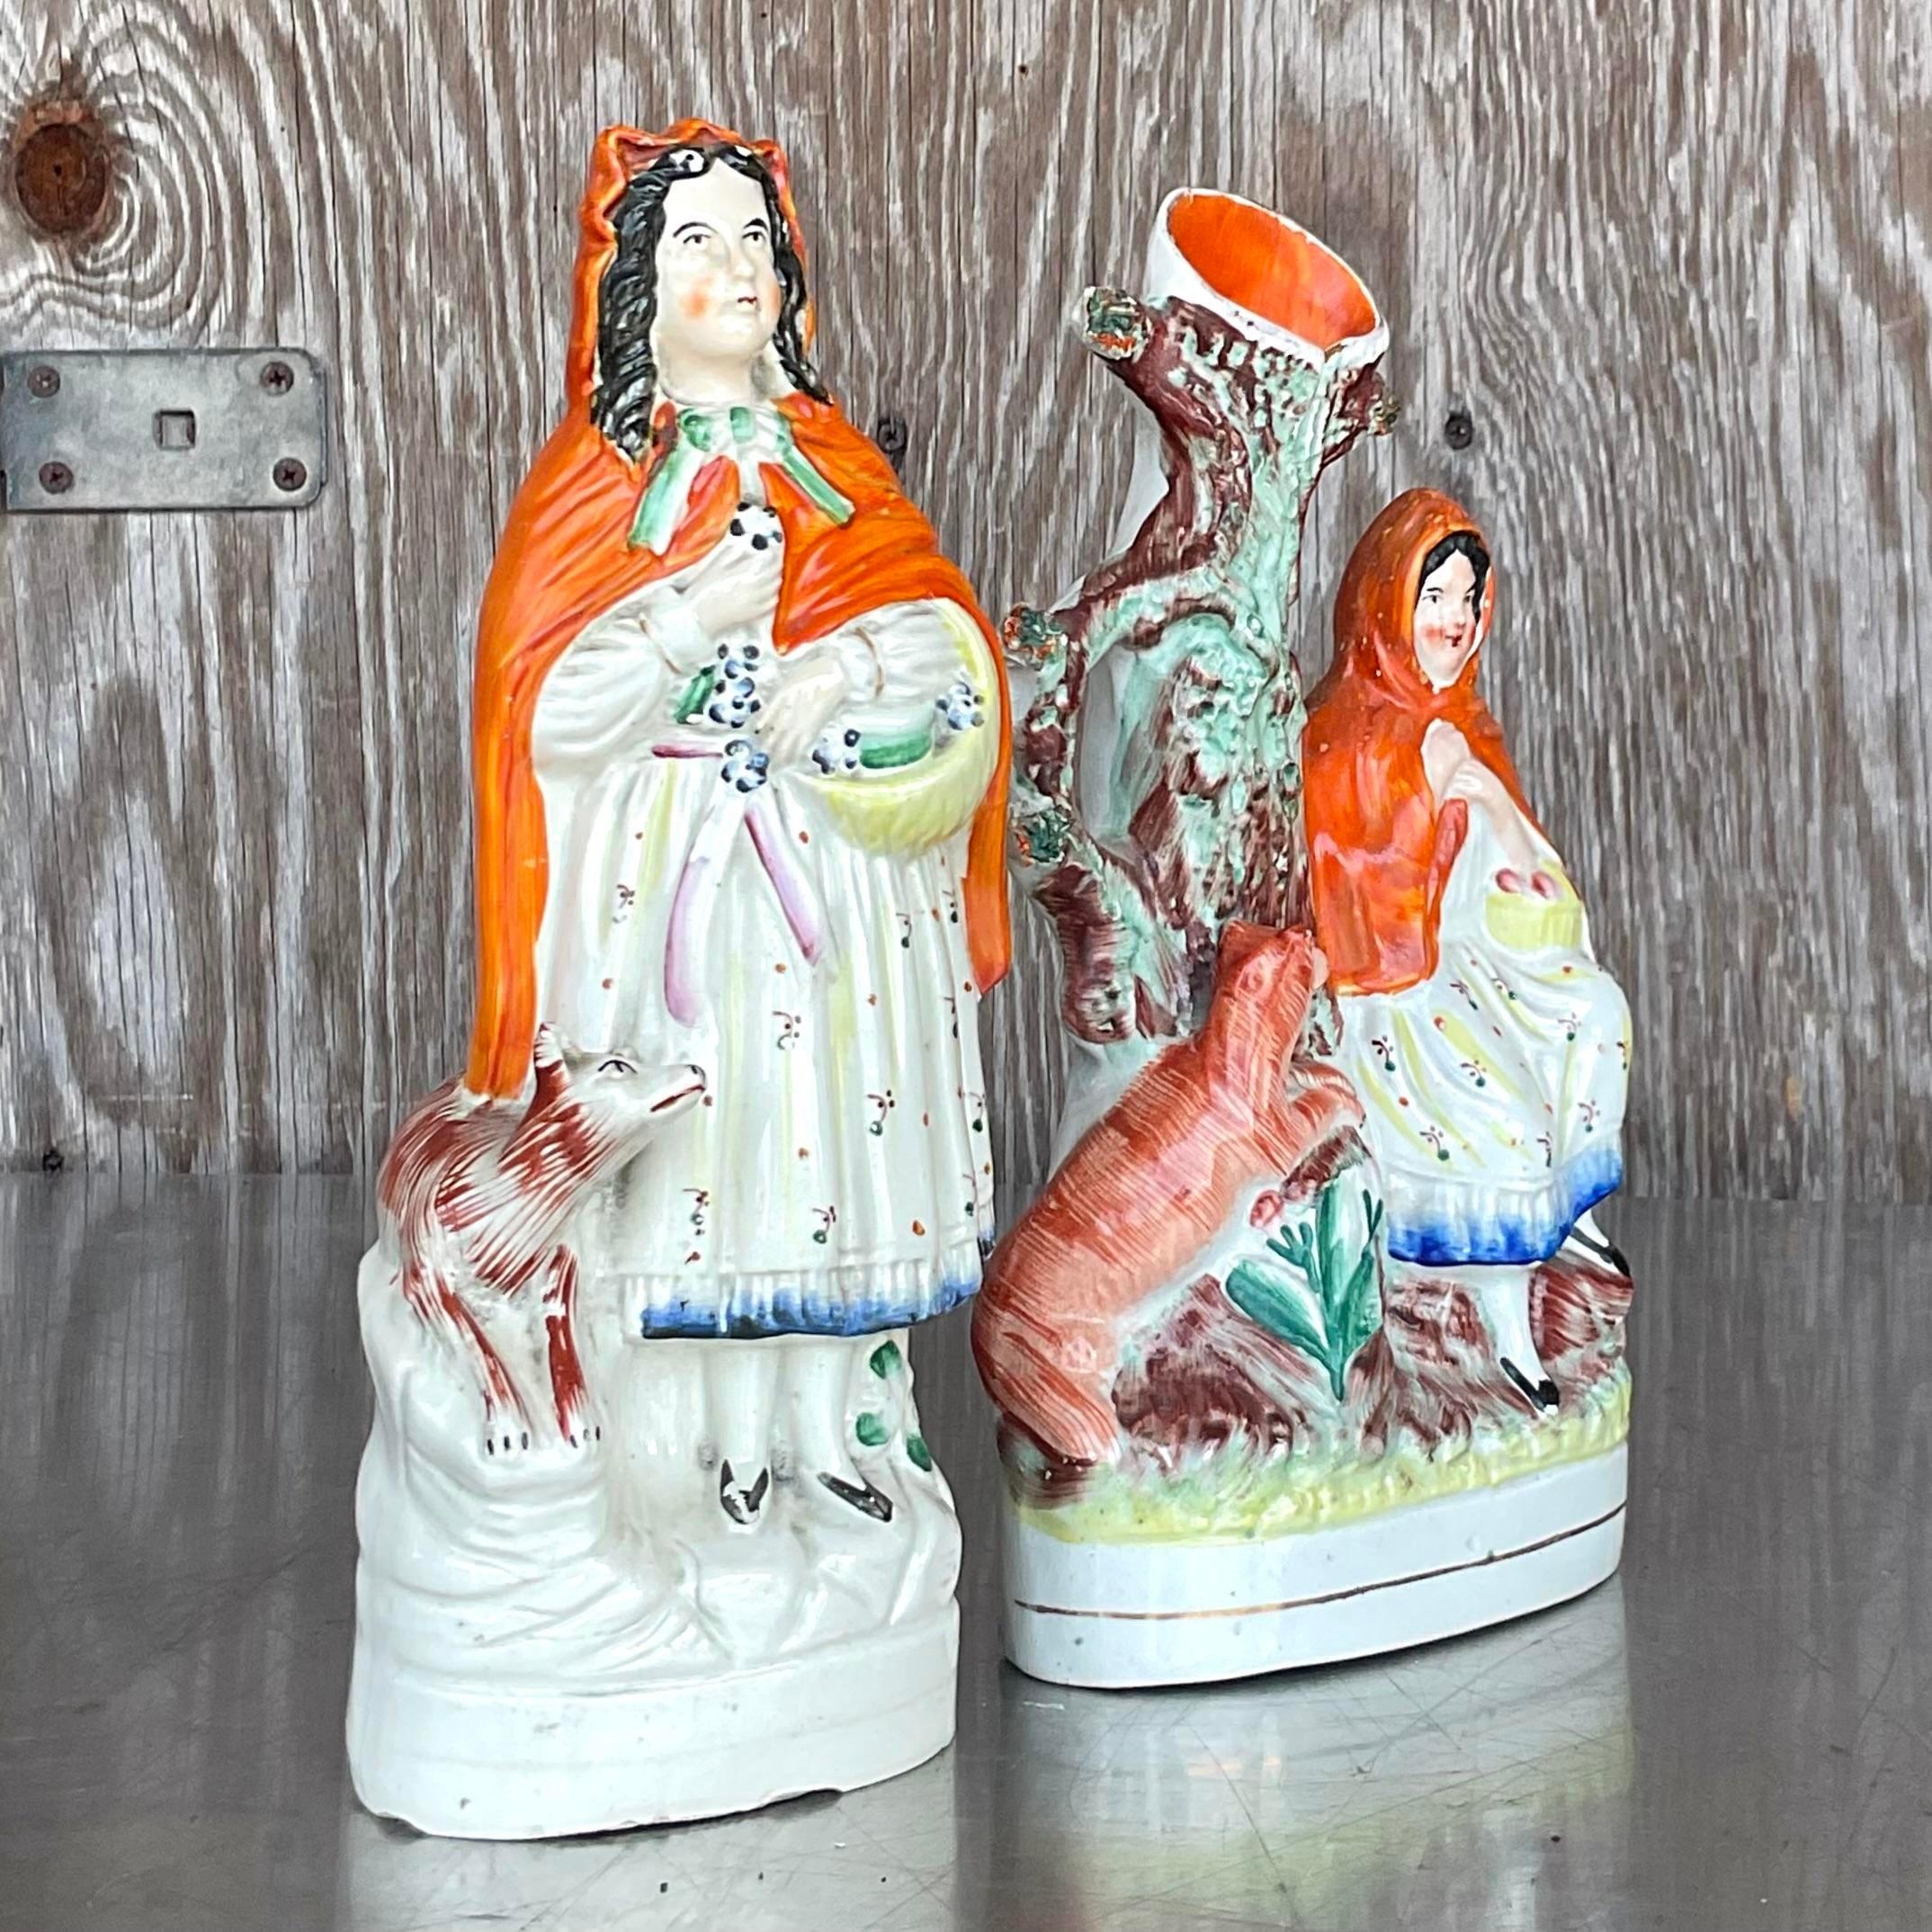 A fabulous vintage pair of Staffordshire style figurines. A classic set of two women in period dress. Acquired from a Palm Beach estate